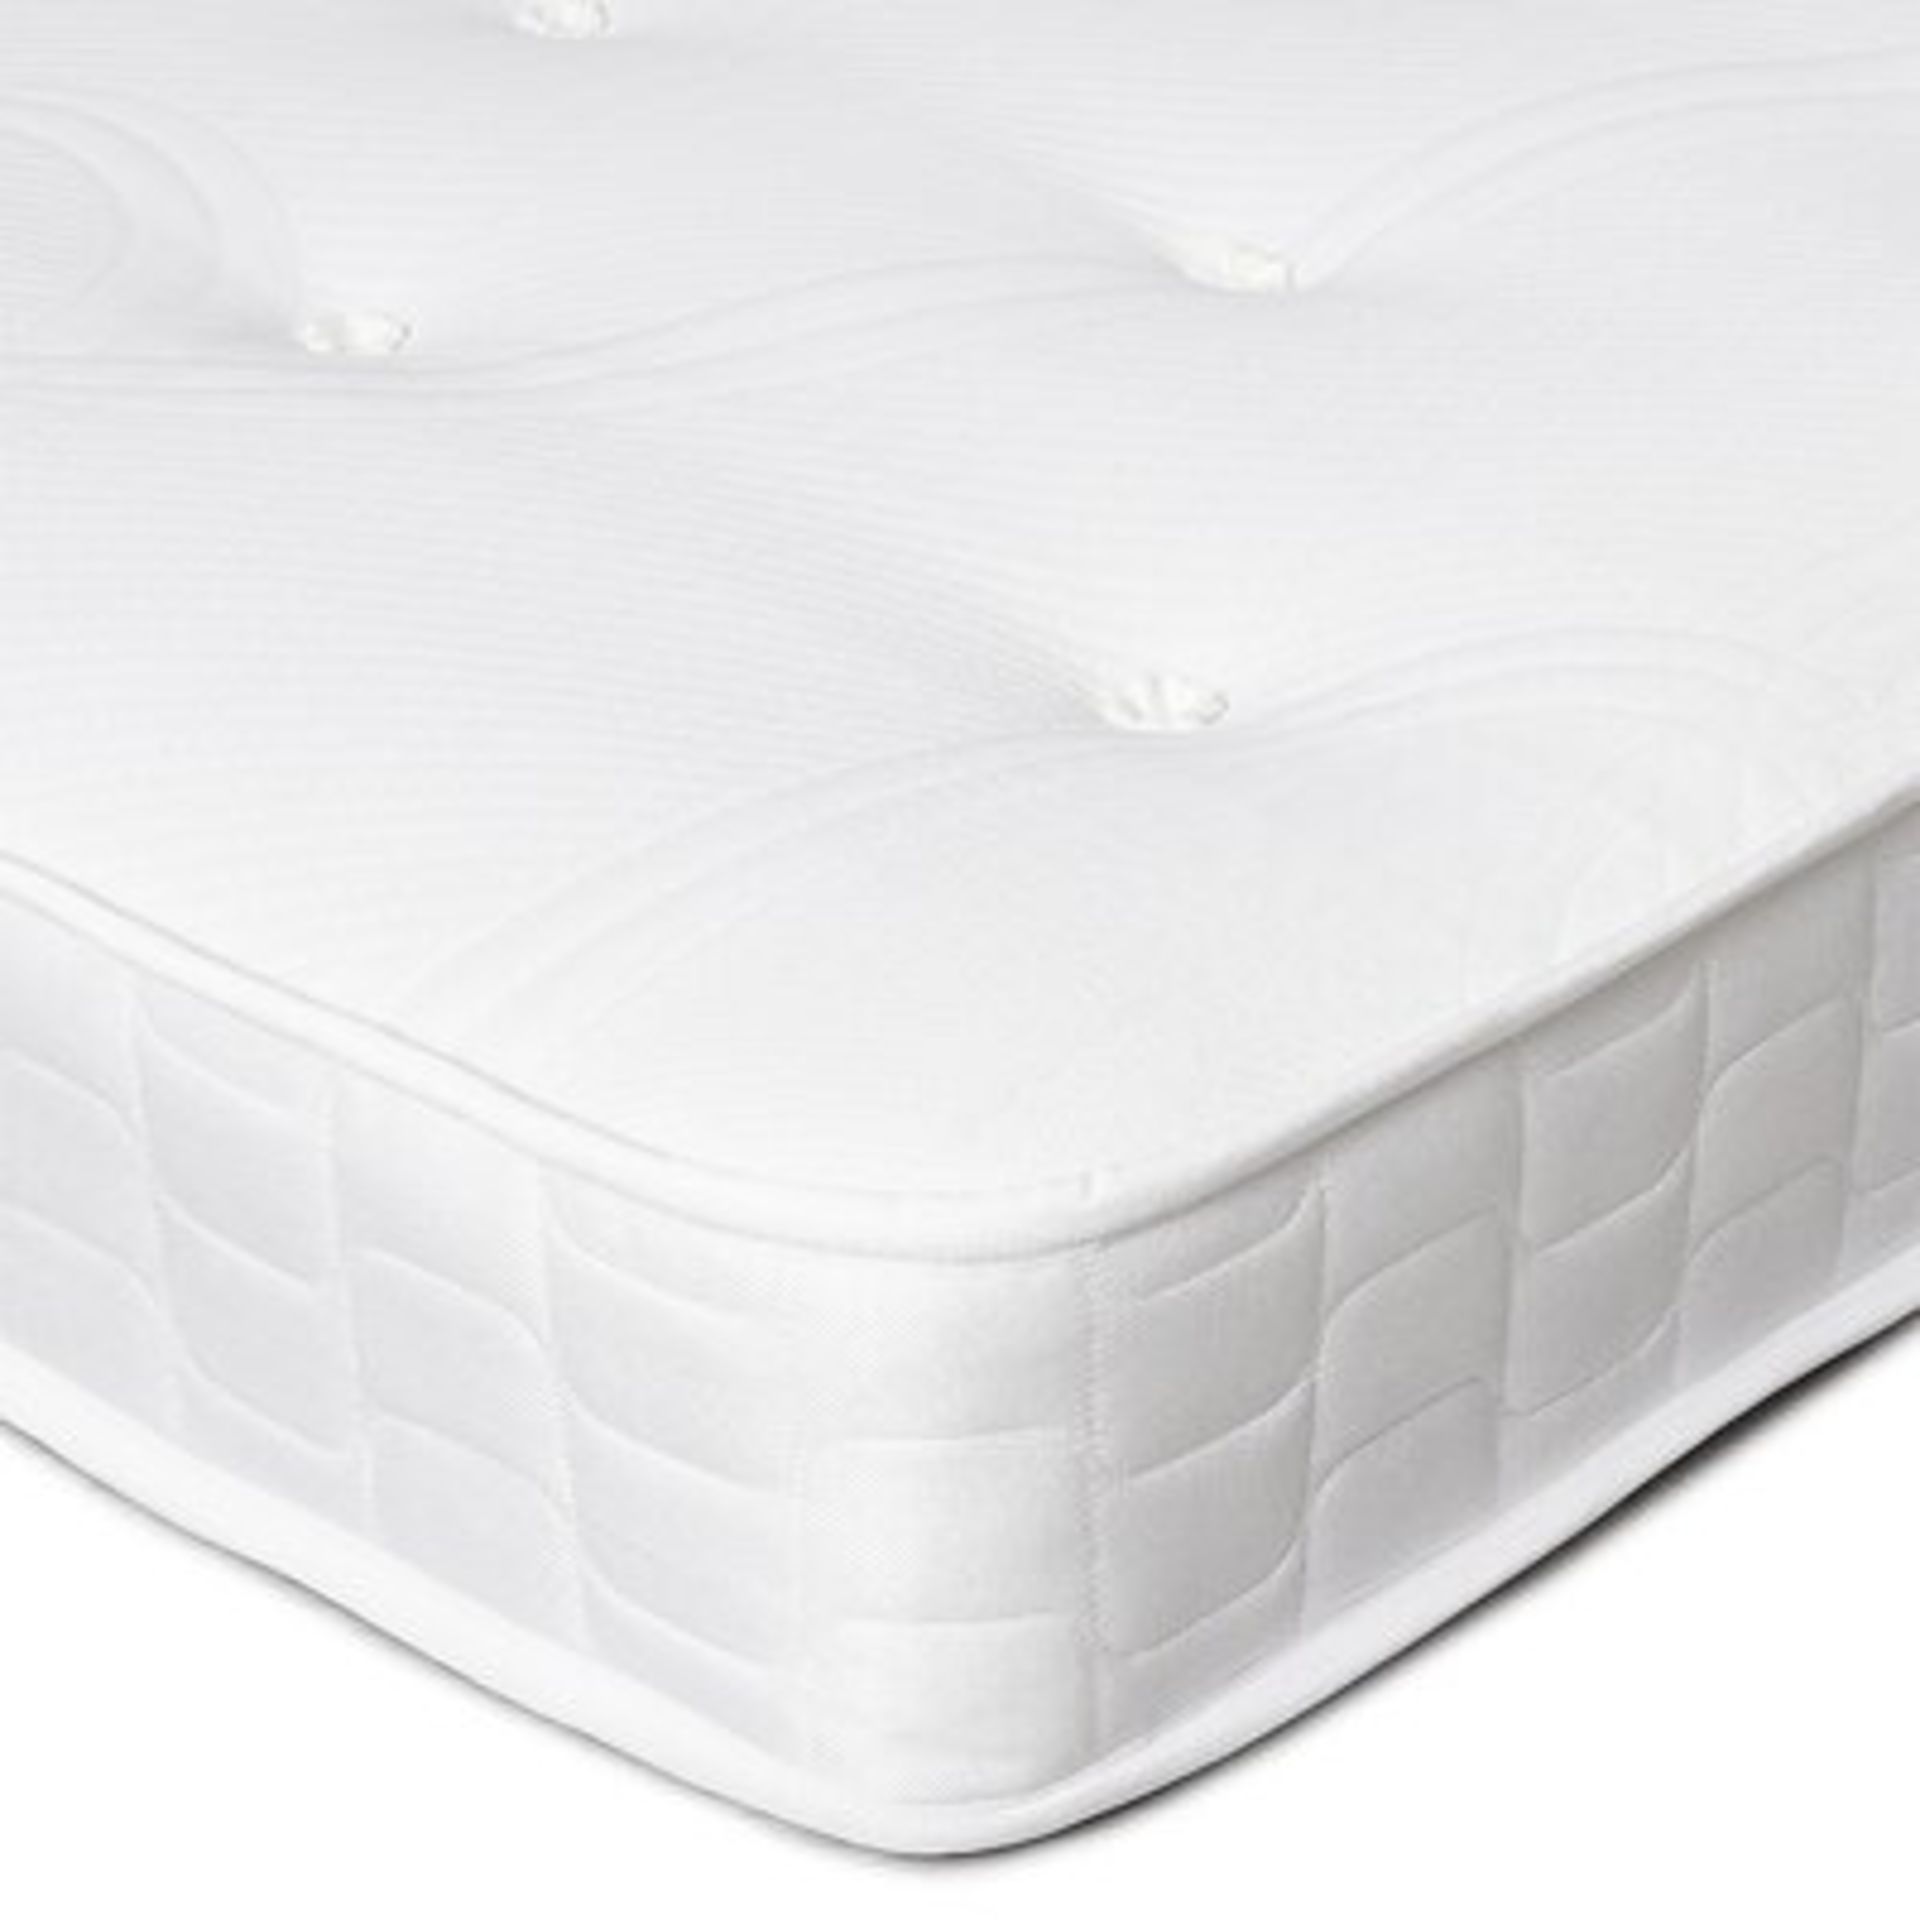 Rolled up Memory Open Coil Mattress. 90x190cm. This medium-firm mattress has been designed to - Image 2 of 2